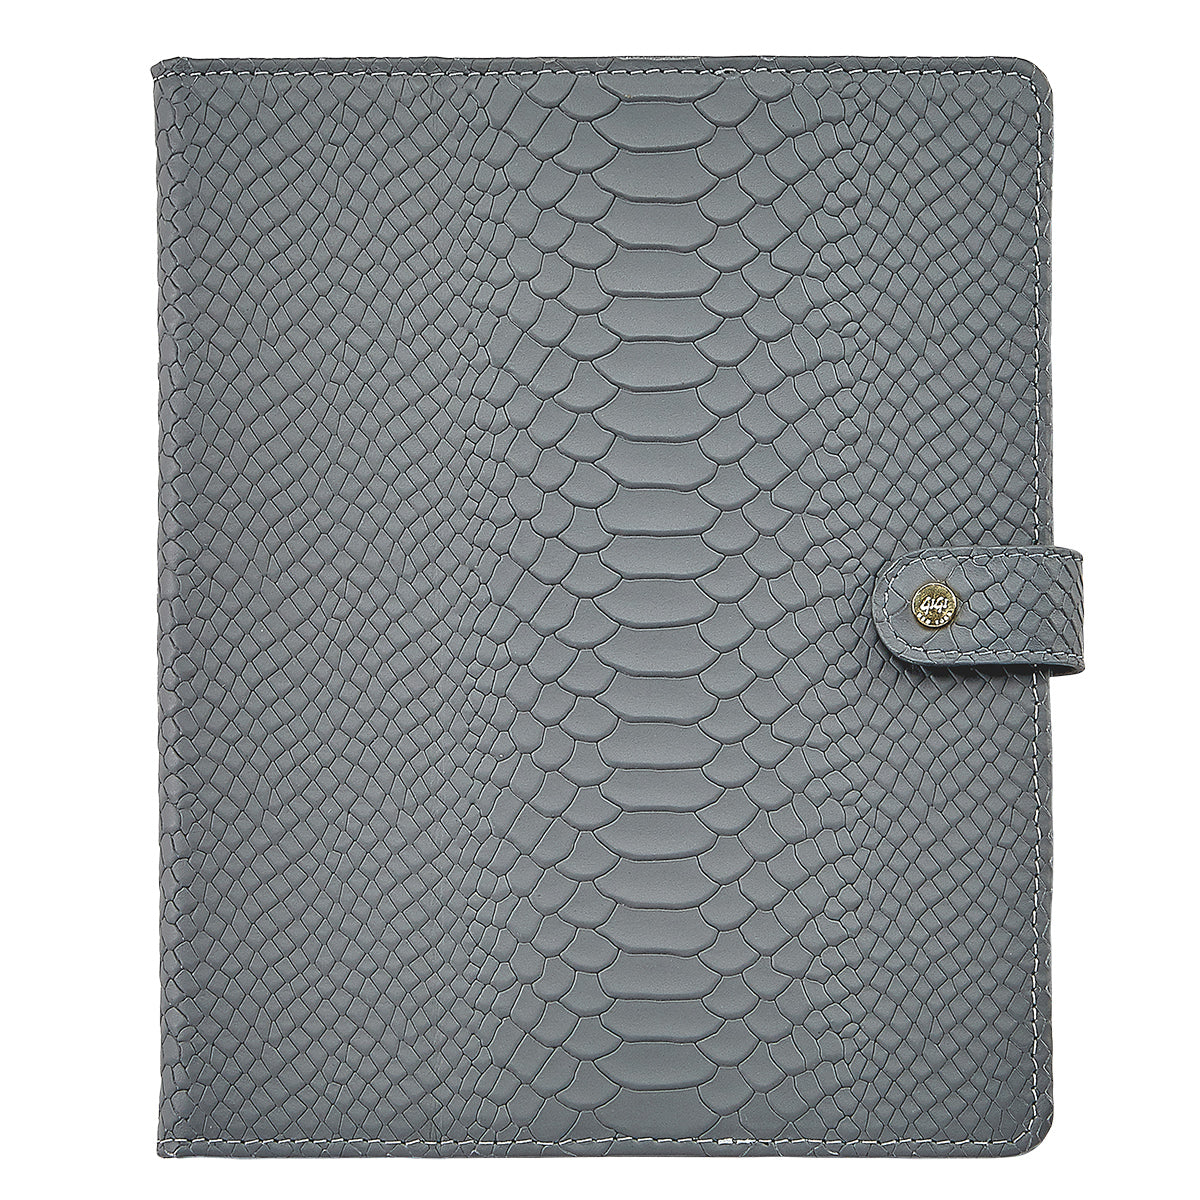 Graphic Image IPad Case Gray Embossed Python Leather